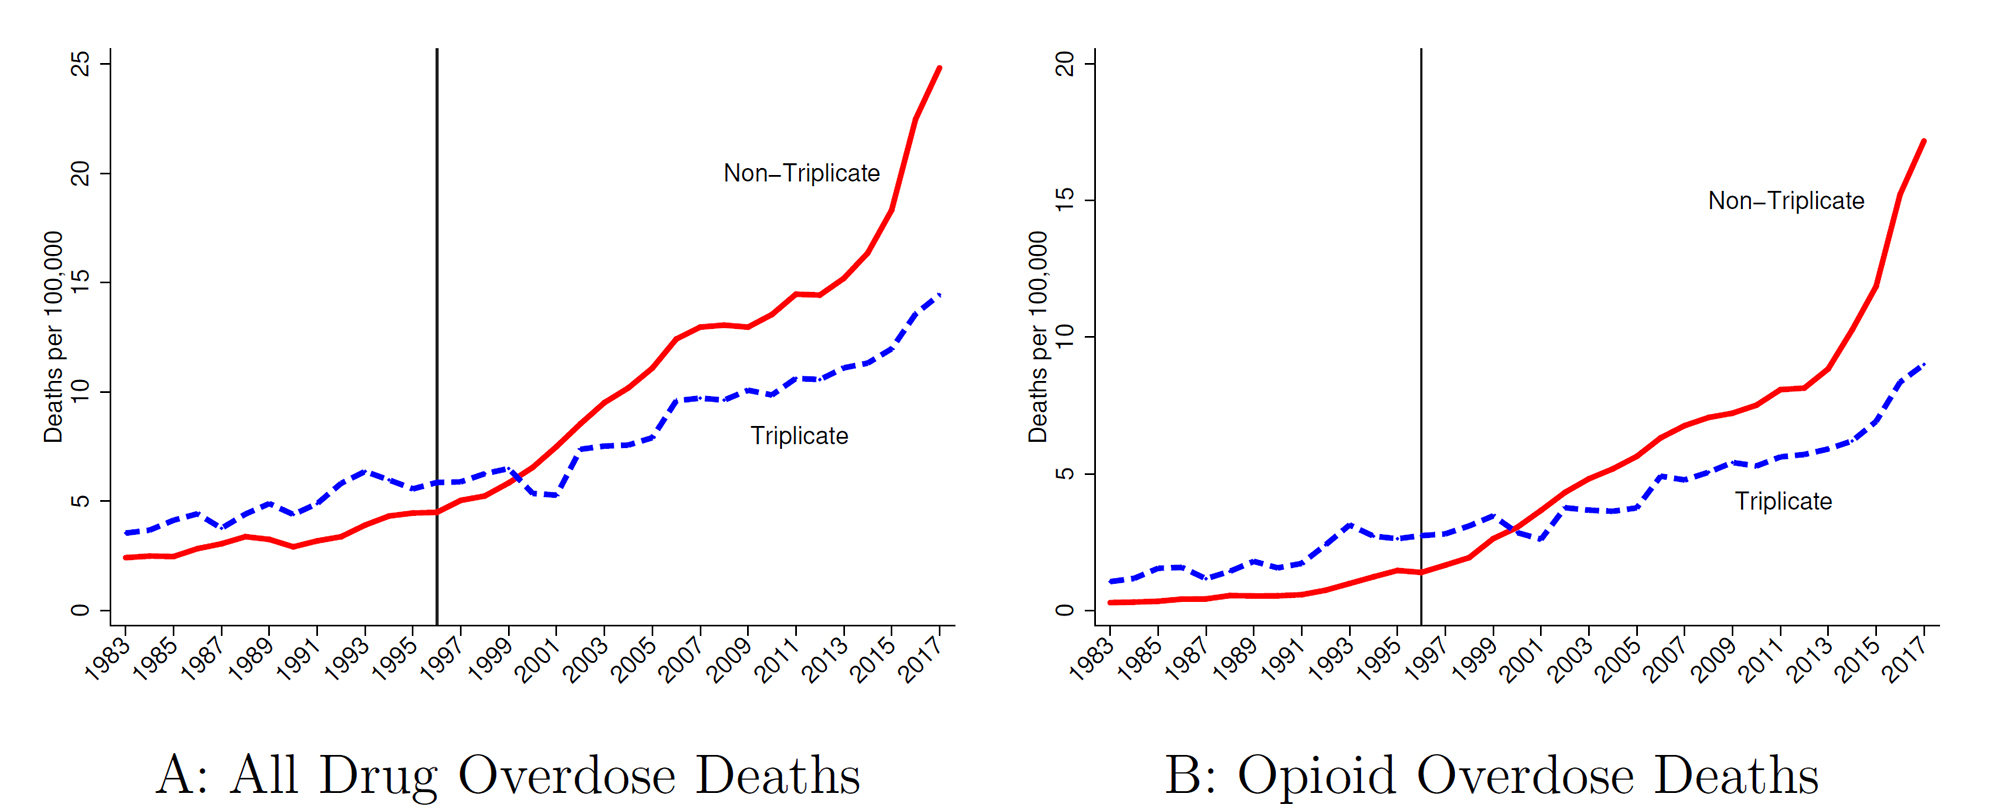 Two graphs comparing all drug overdose deaths and opioid overdose deaths, one line showing triplicate states, and the other, higher line, showing non-triplicate states, from 1983 to 2017.